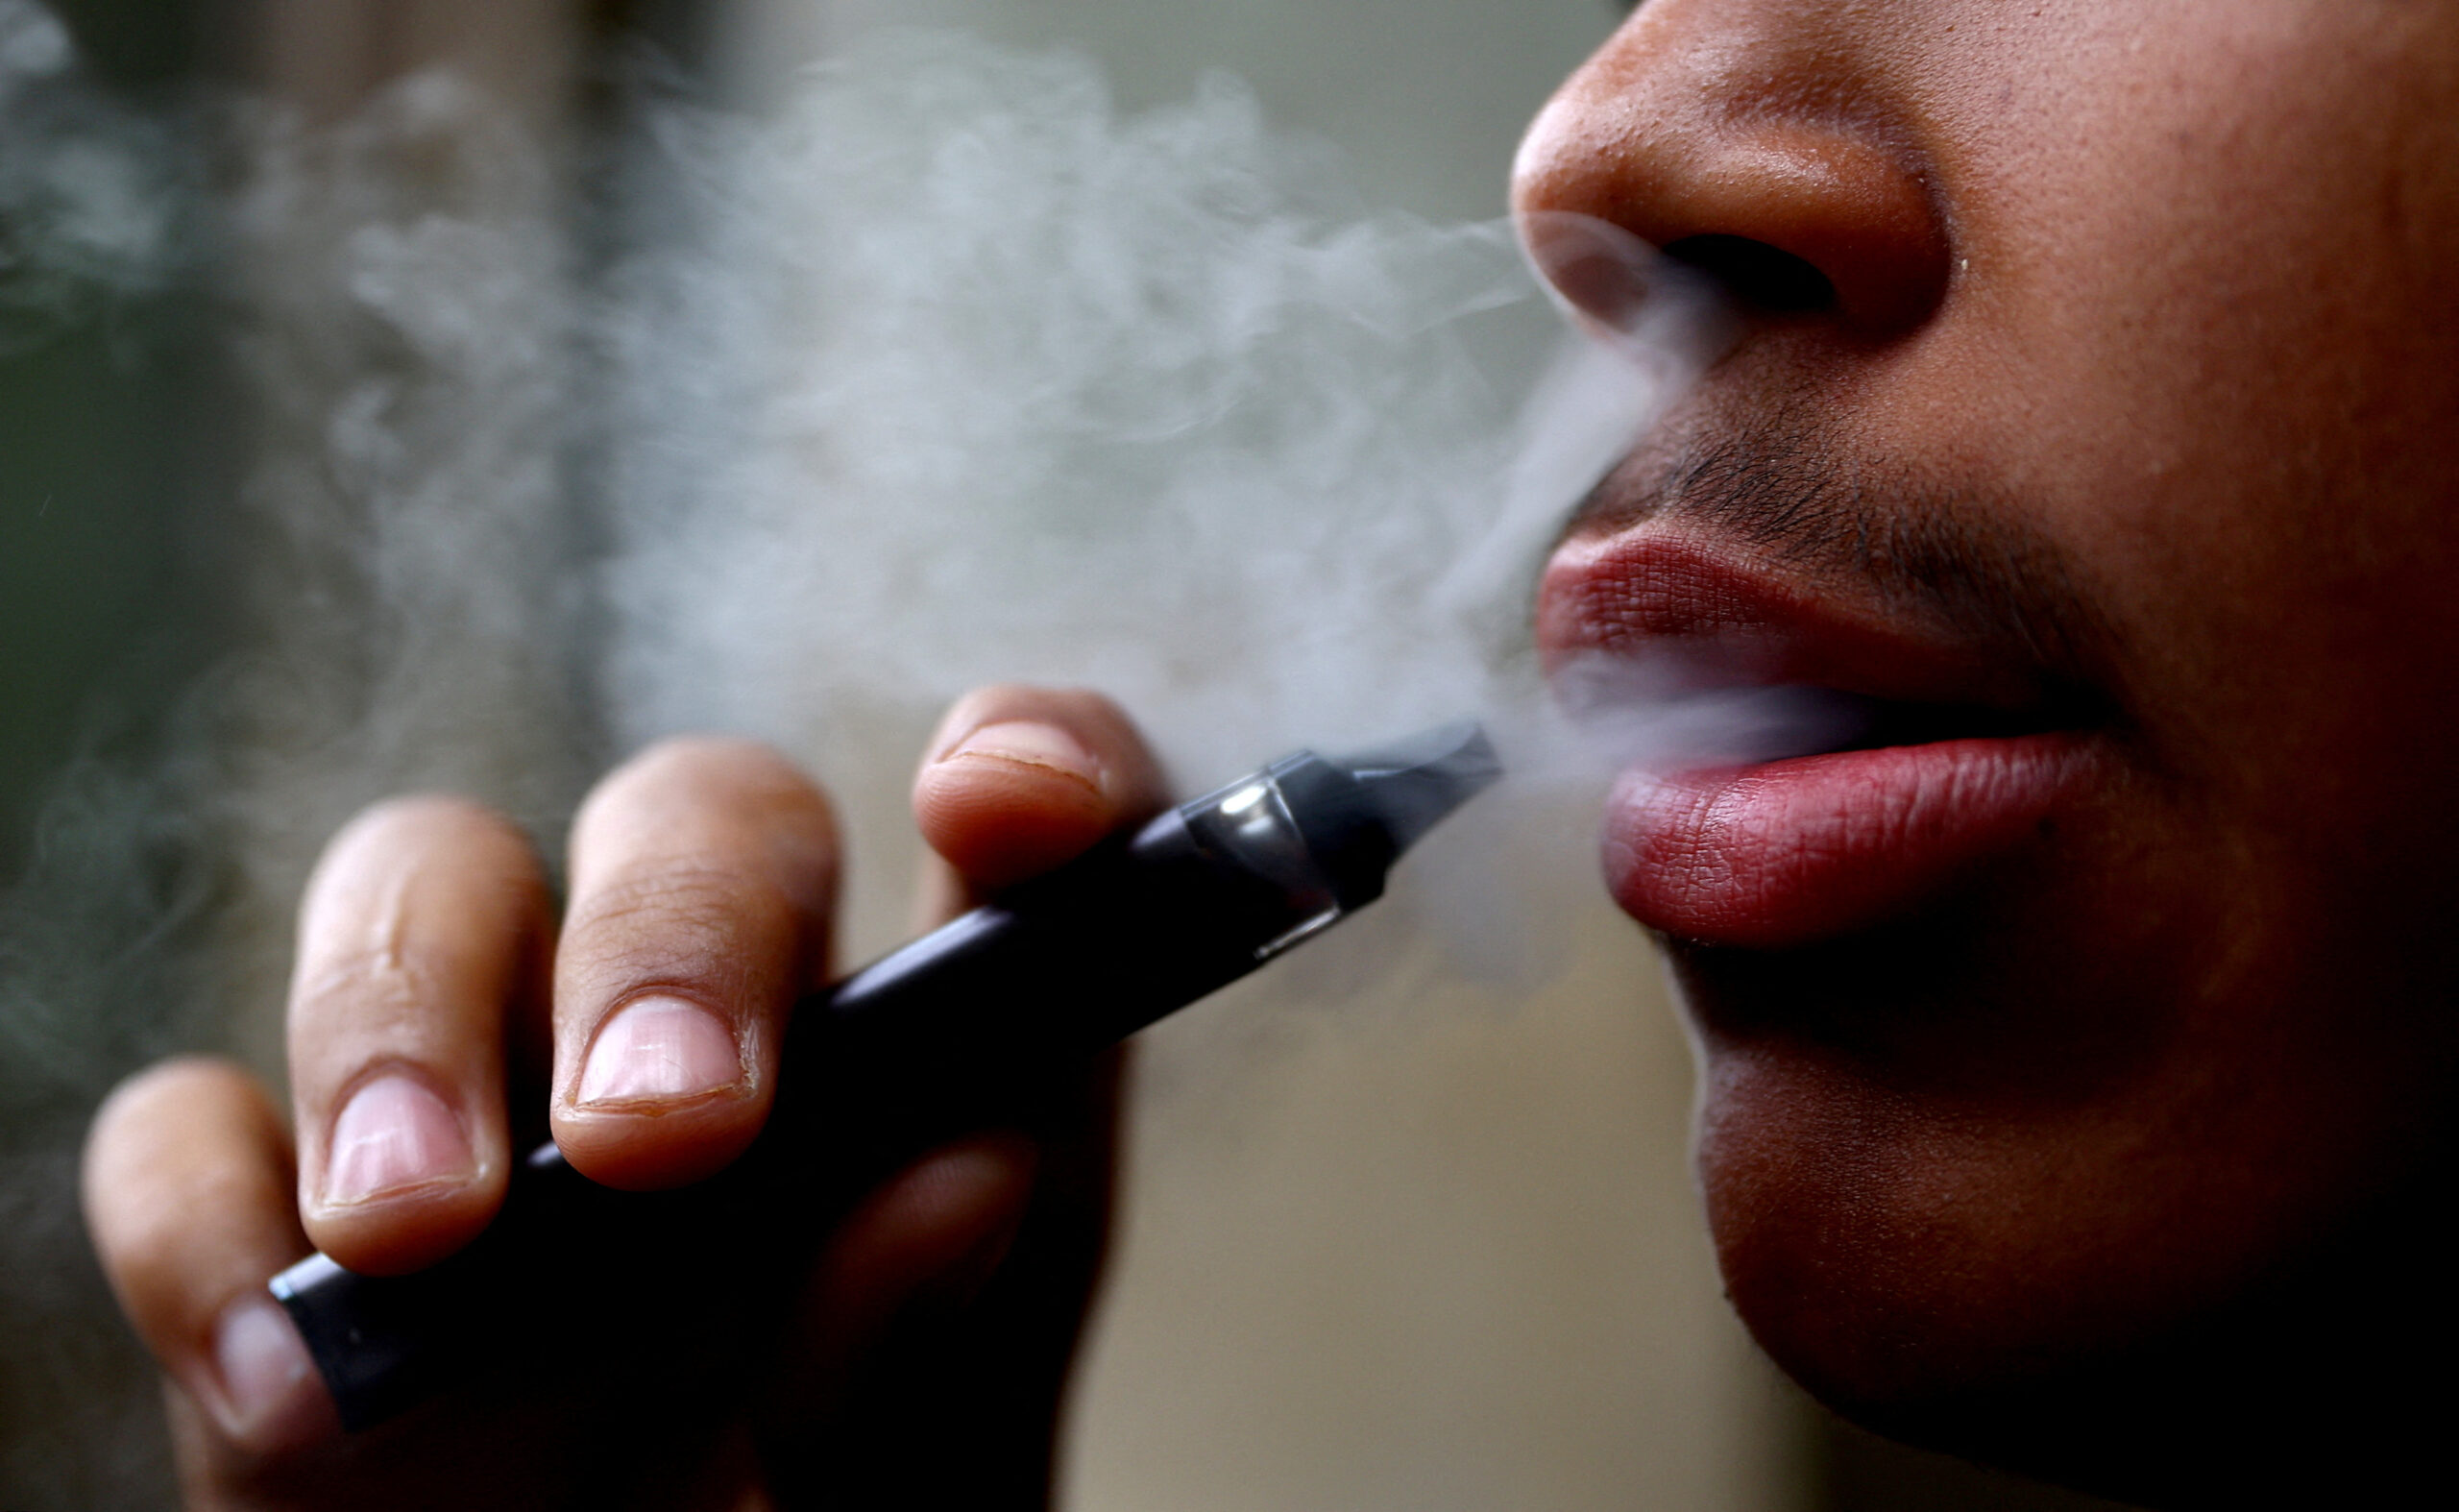 vaping not a safer alternative to cigarette smoking, says health advocate